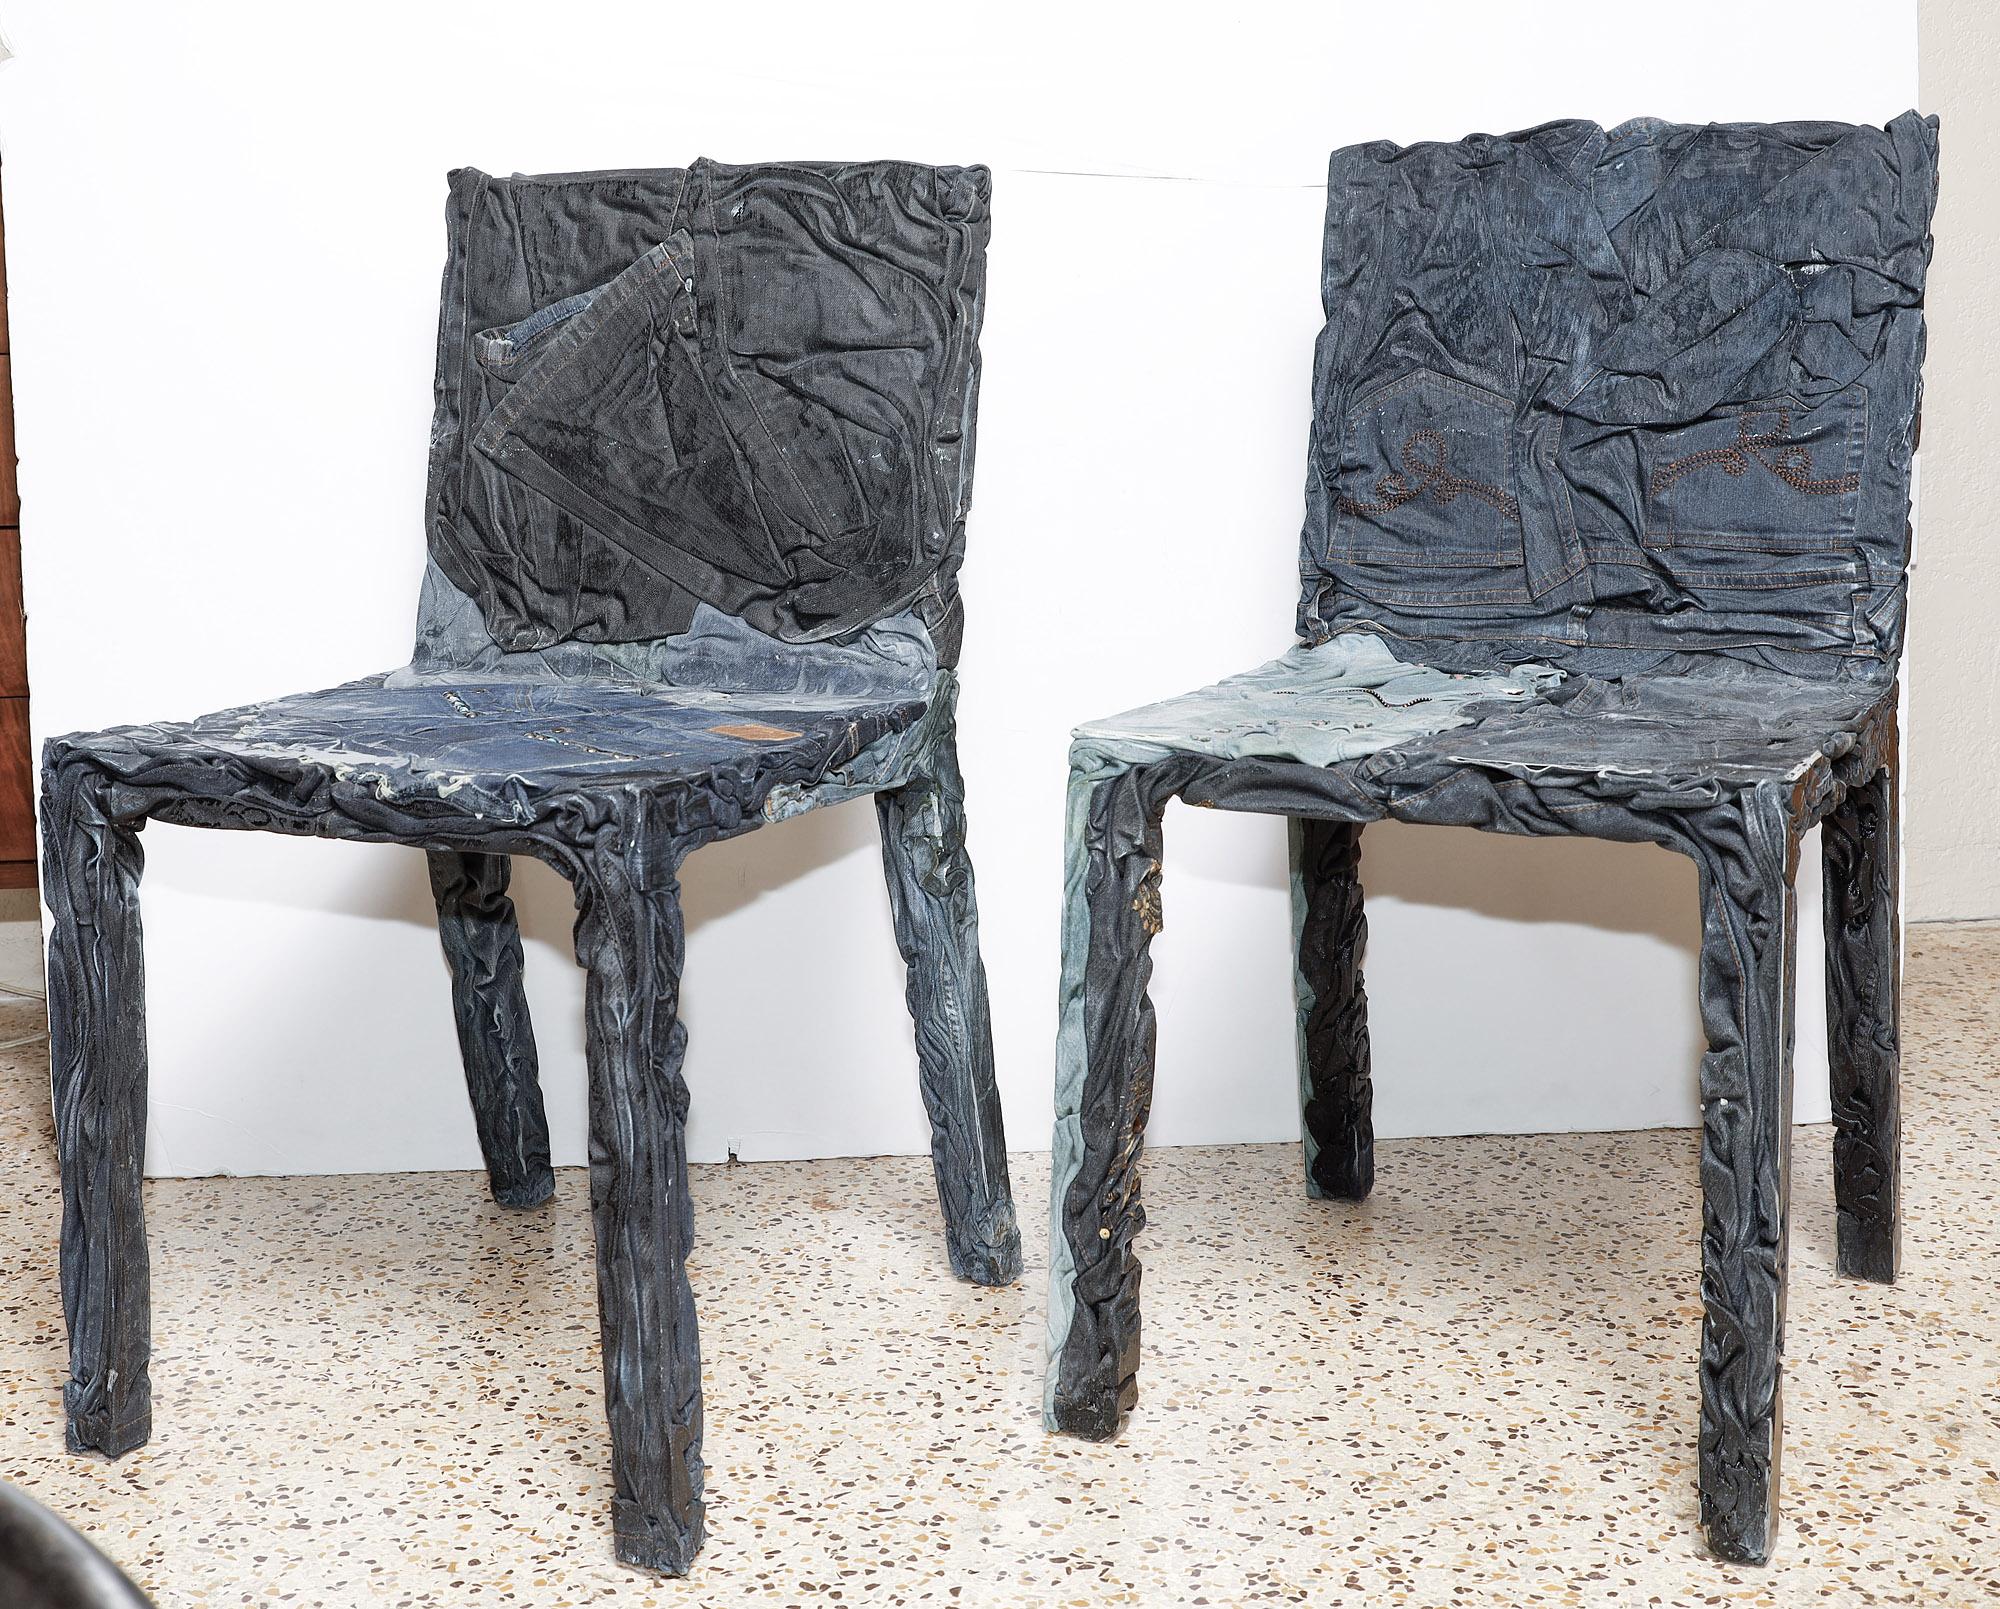 Functional art formed where a future of sustainability meets the memories of the past, recycled denim and a proprietary resin blend are used to create this pair of 